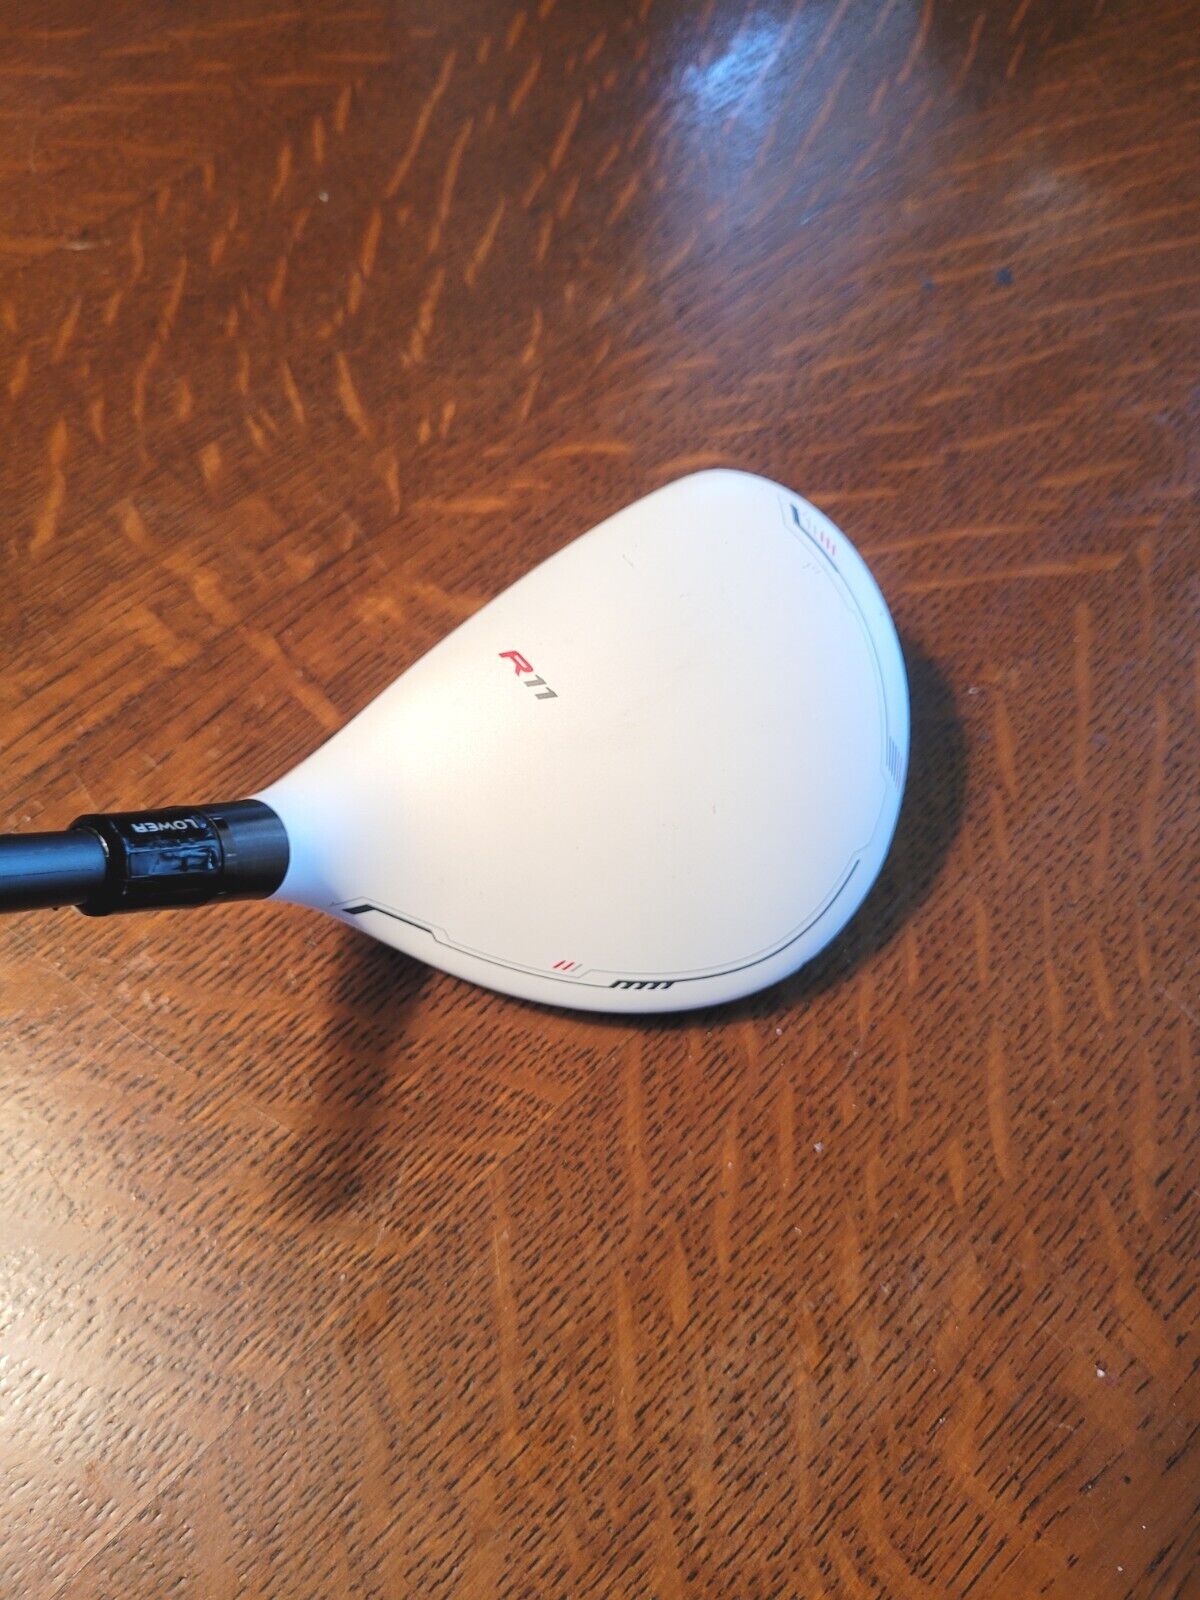 TaylorMade R11-S 4 Wood 17* RH Head. Includes the TaylorMade shaft adapter